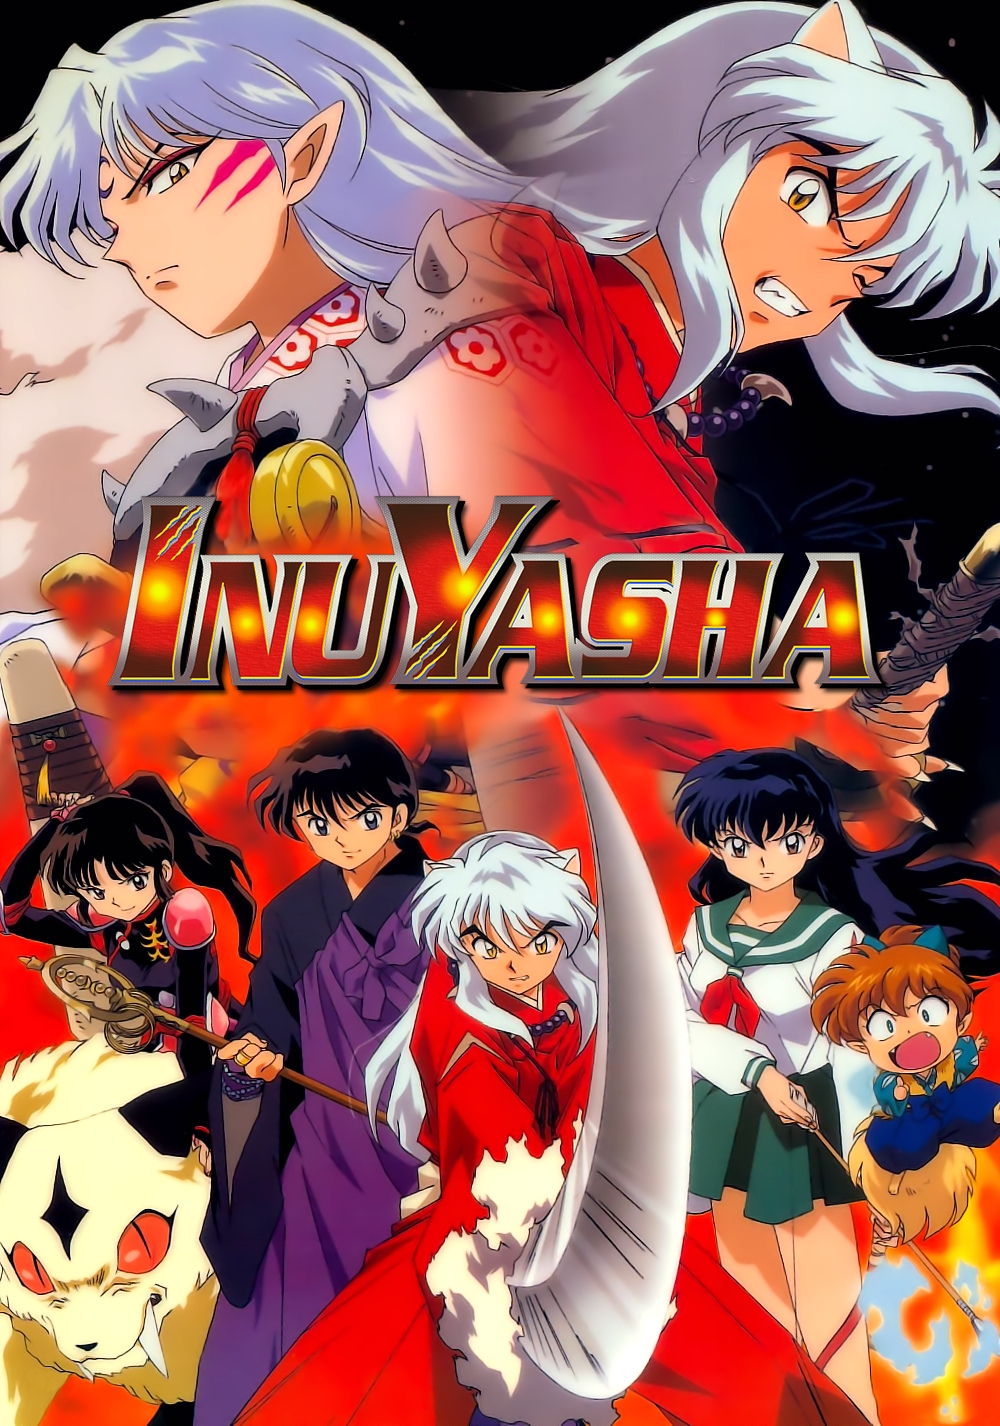 how many seasons of inuyasha are there